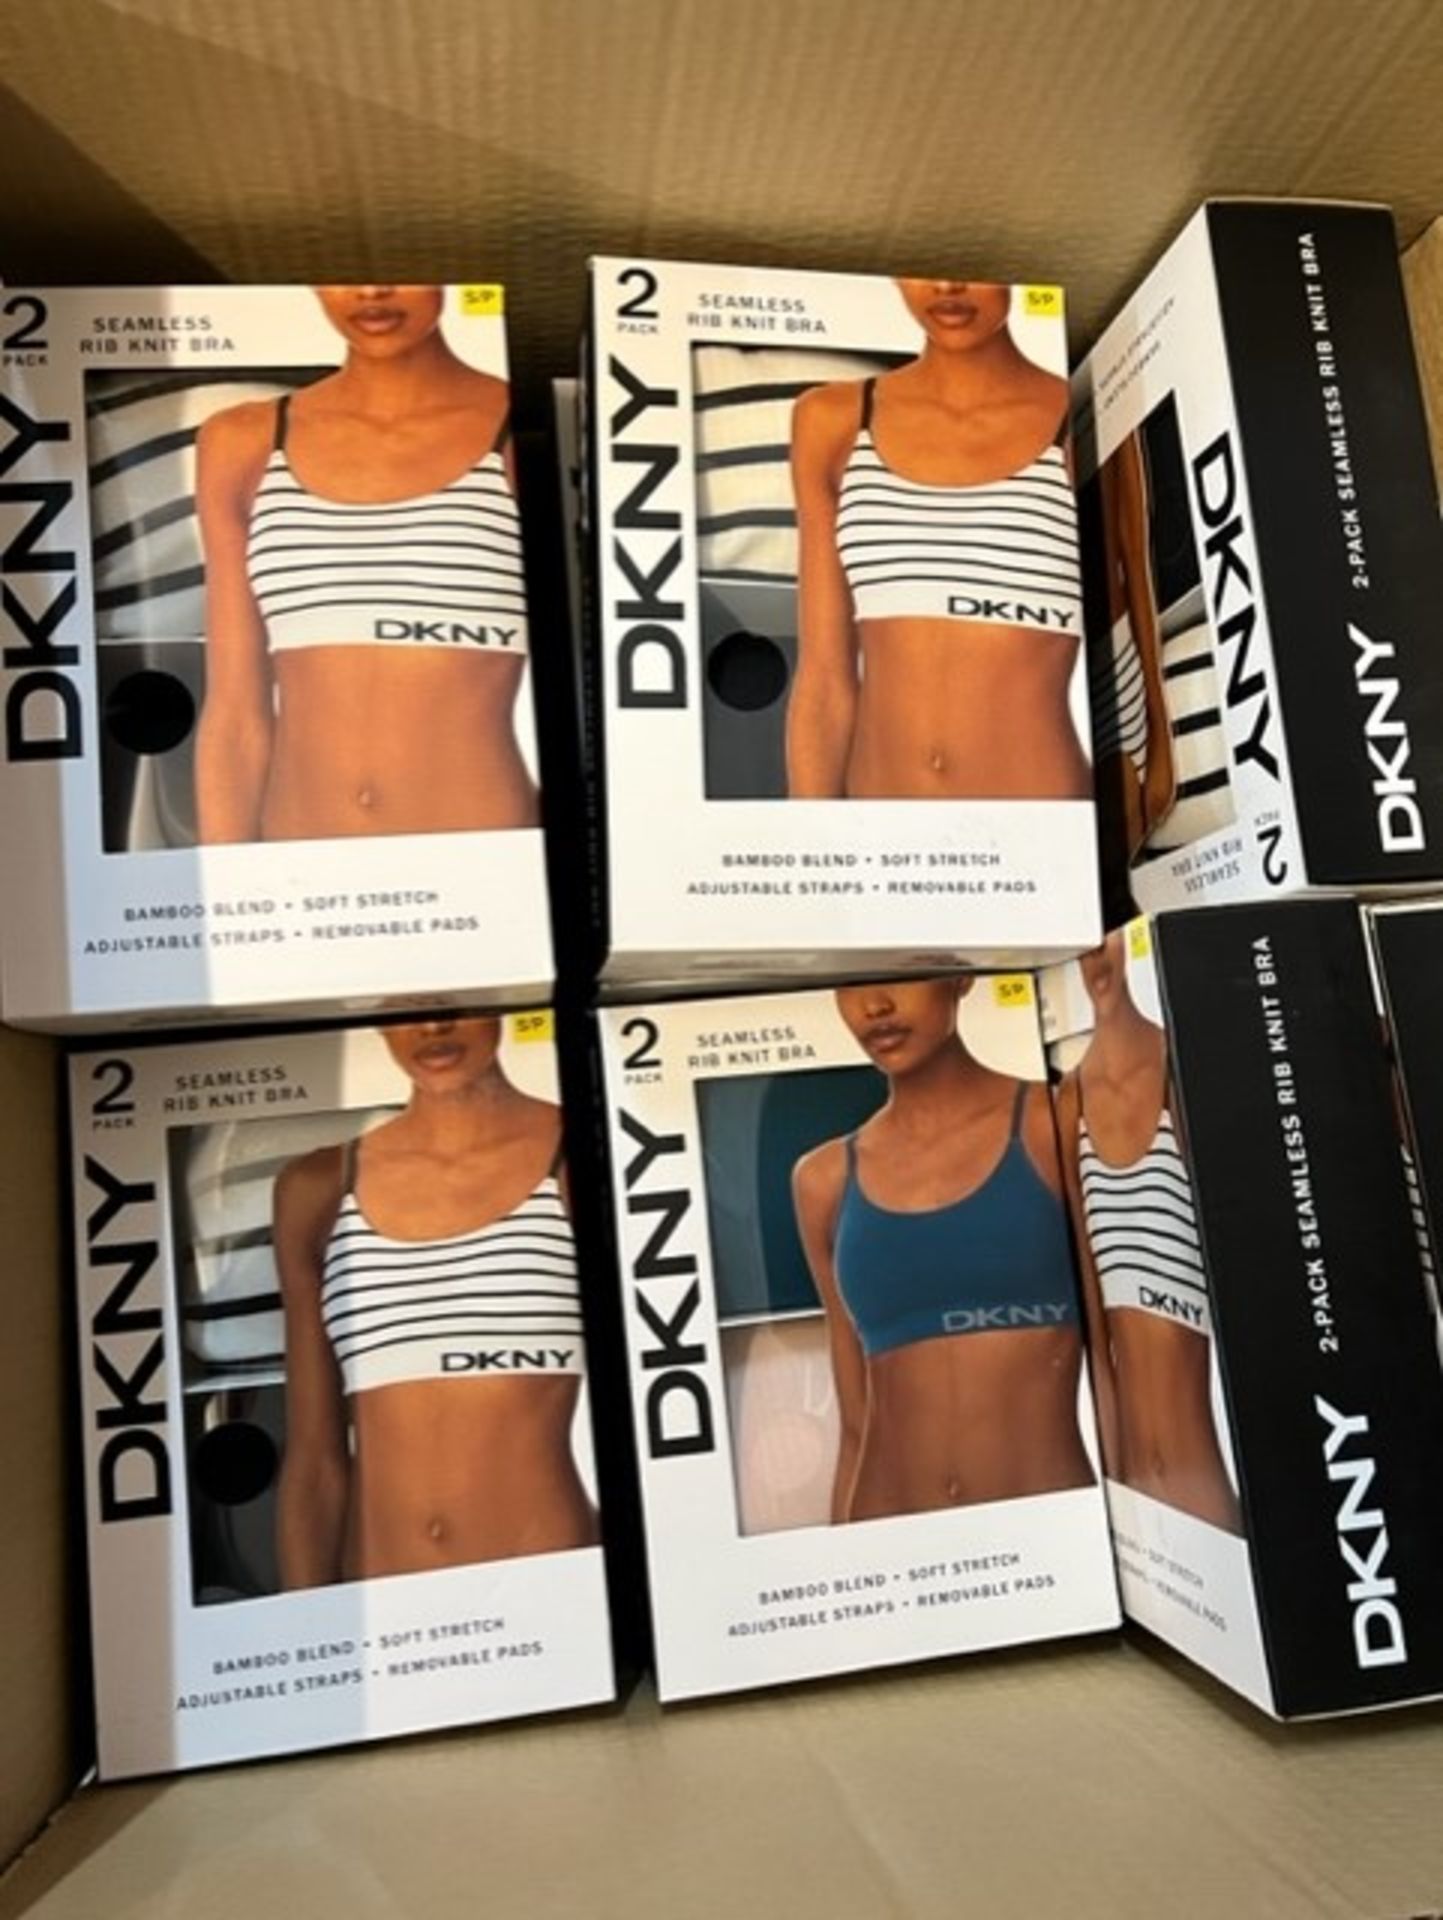 1 BRAND NEW BOXED DKNY WOMEN'S SEAMLESS RIB KNIT 2 PACK BRALETTE SIZE S RRP Â£24.99 (VARIOUS